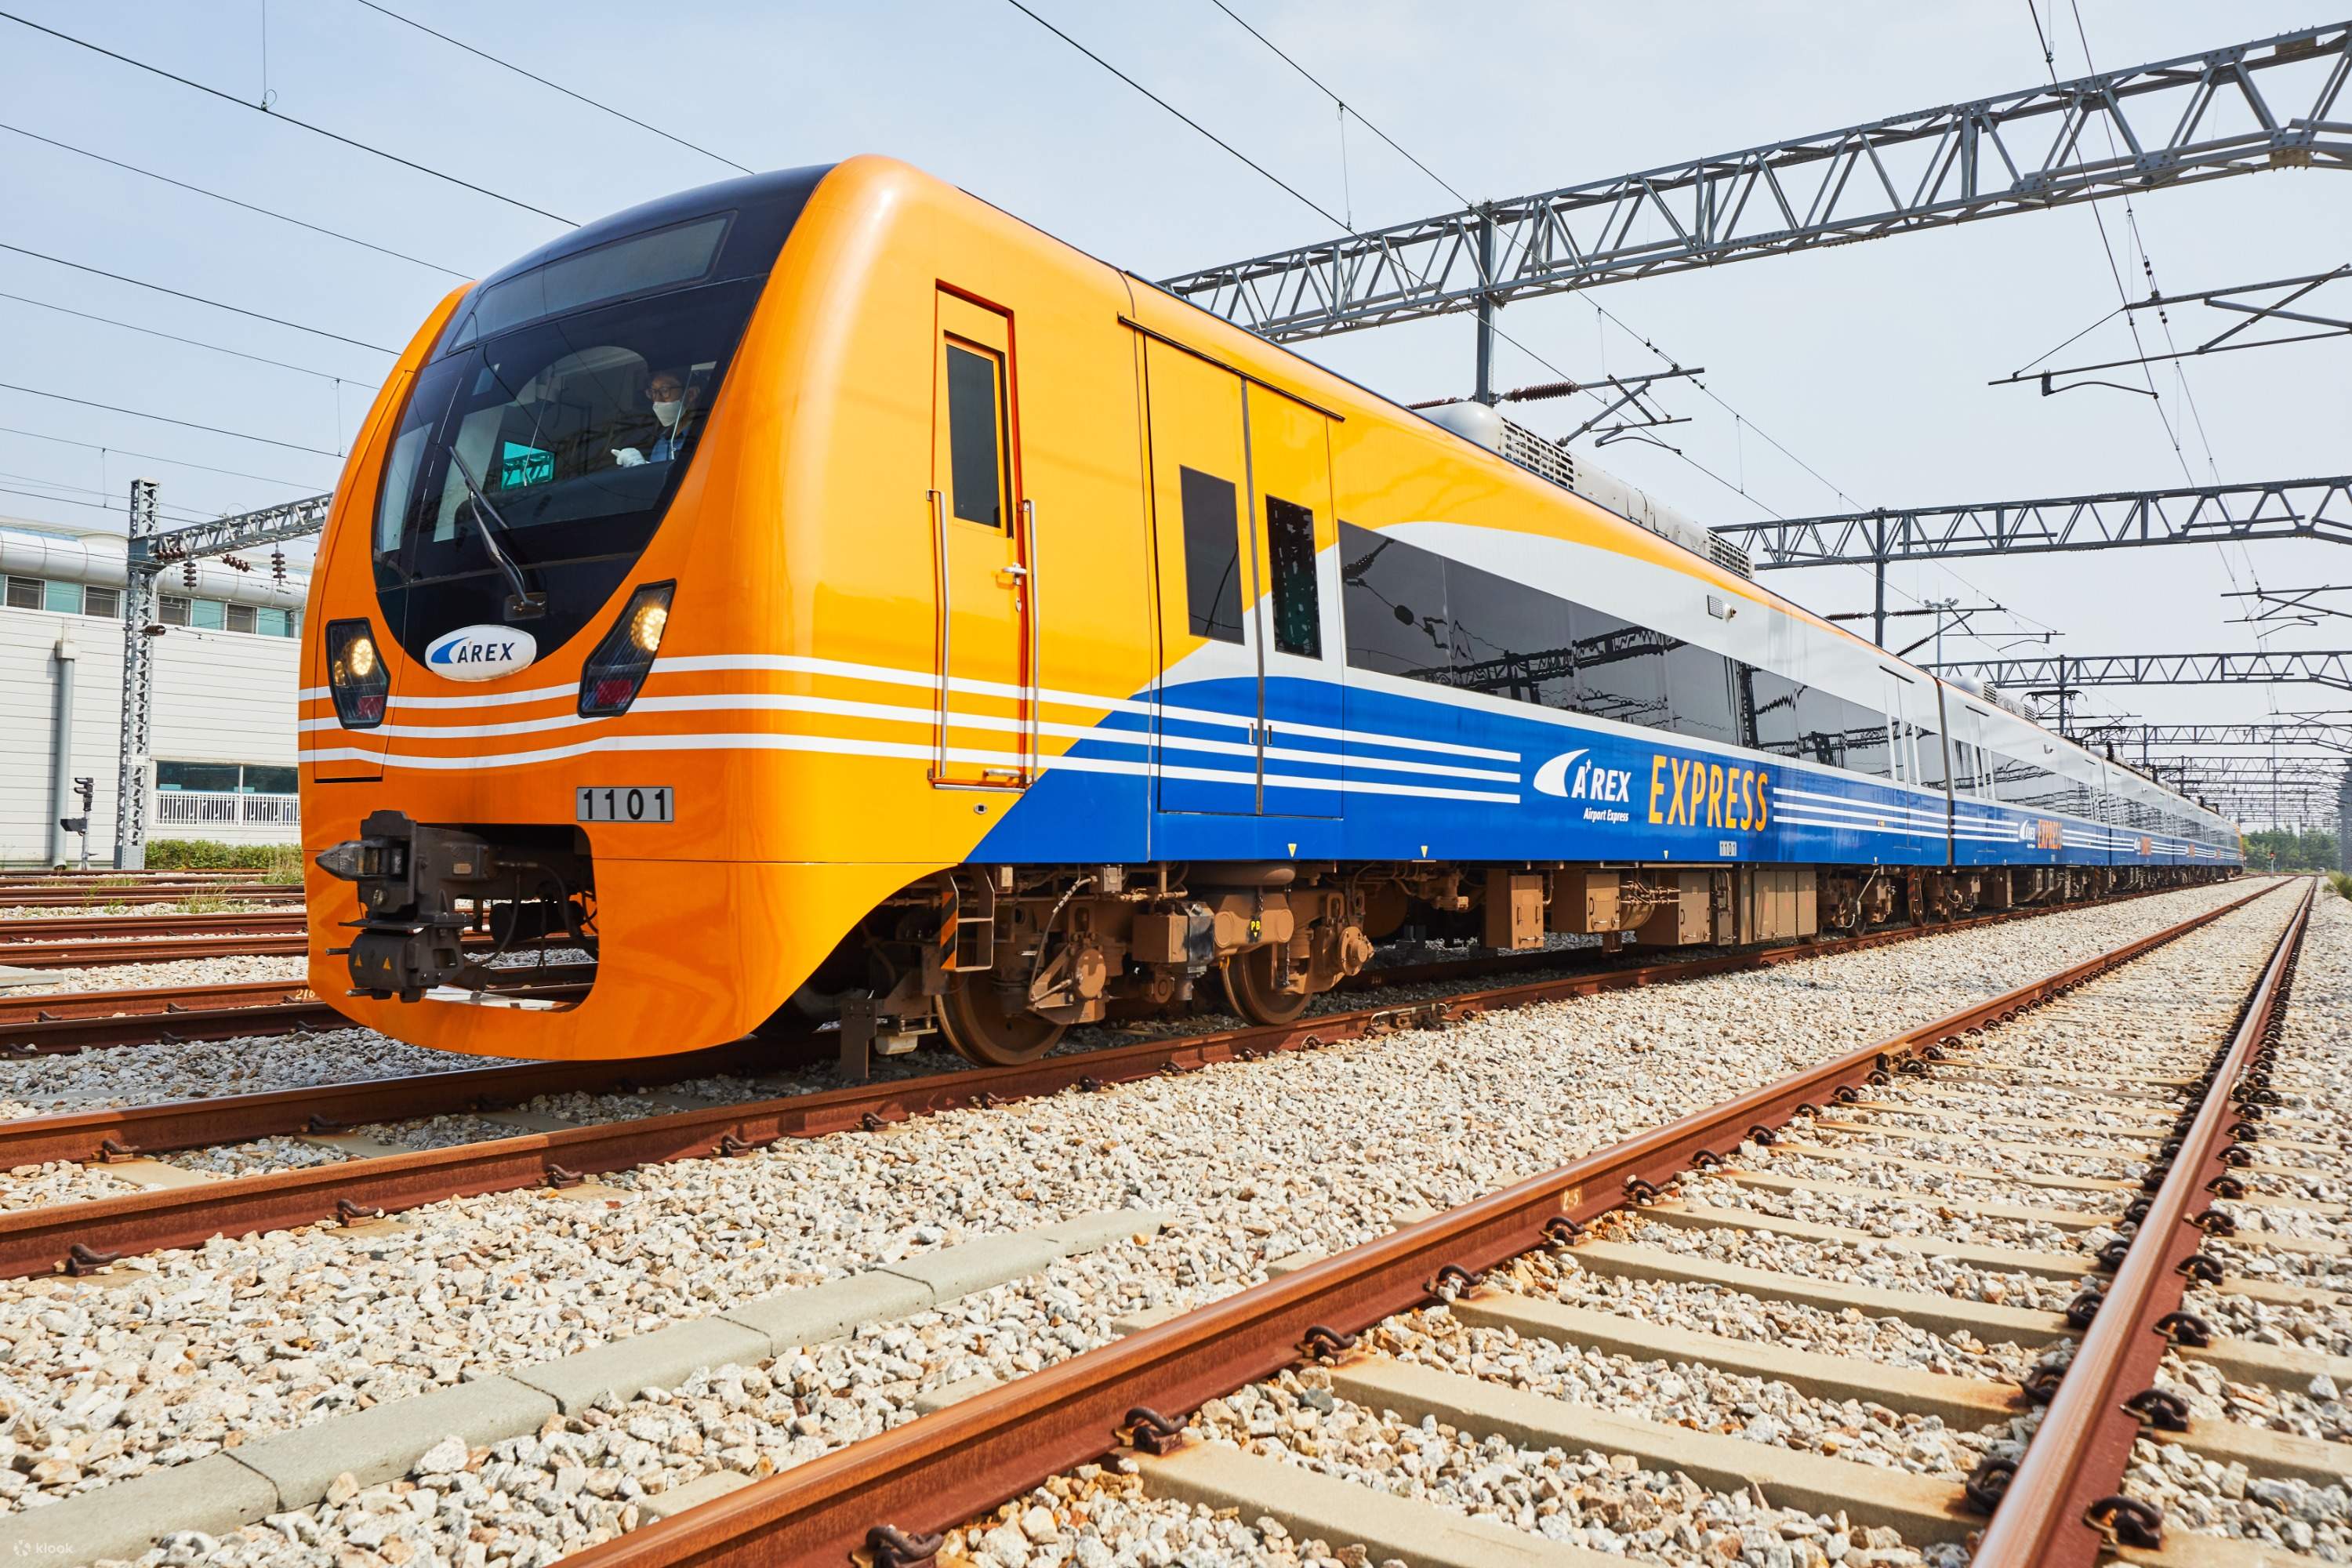 Buy AREX Incheon Airport Express Train, Seoul One Way Ticket Online - Klook  New Zealand